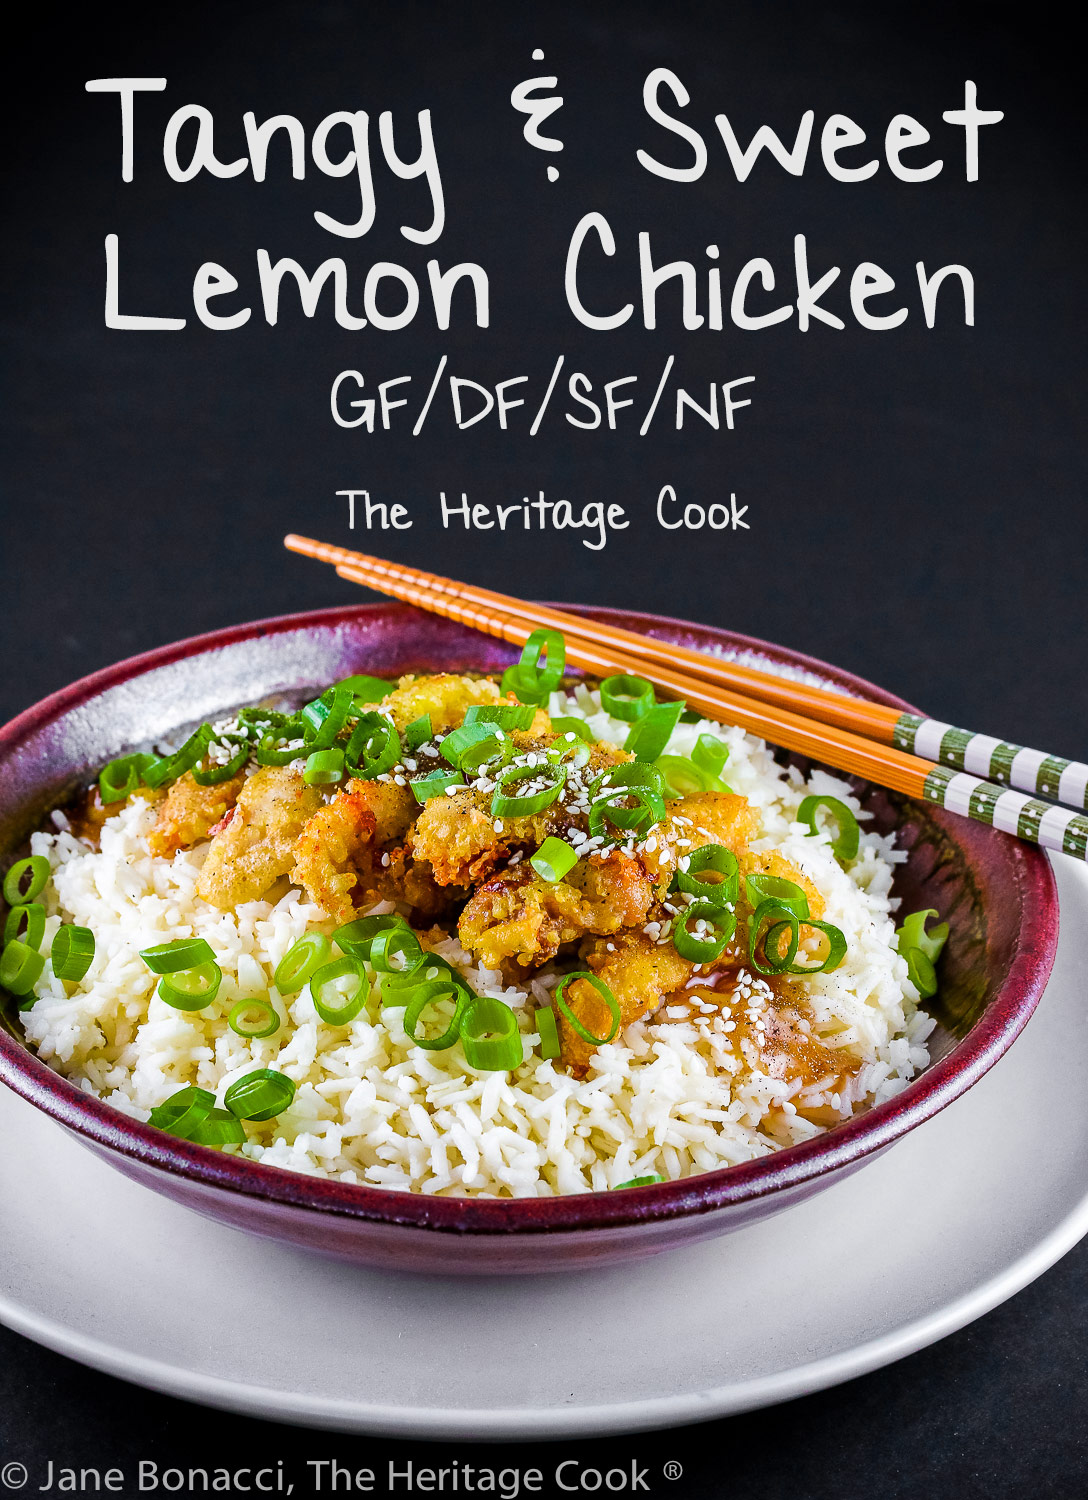 Tangy and Sweet Lemon Chicken (Gluten-Free, Soy-Free, Dairy-Free, Nut-Free) © 2021 Jane Bonacci, The Heritage Cook